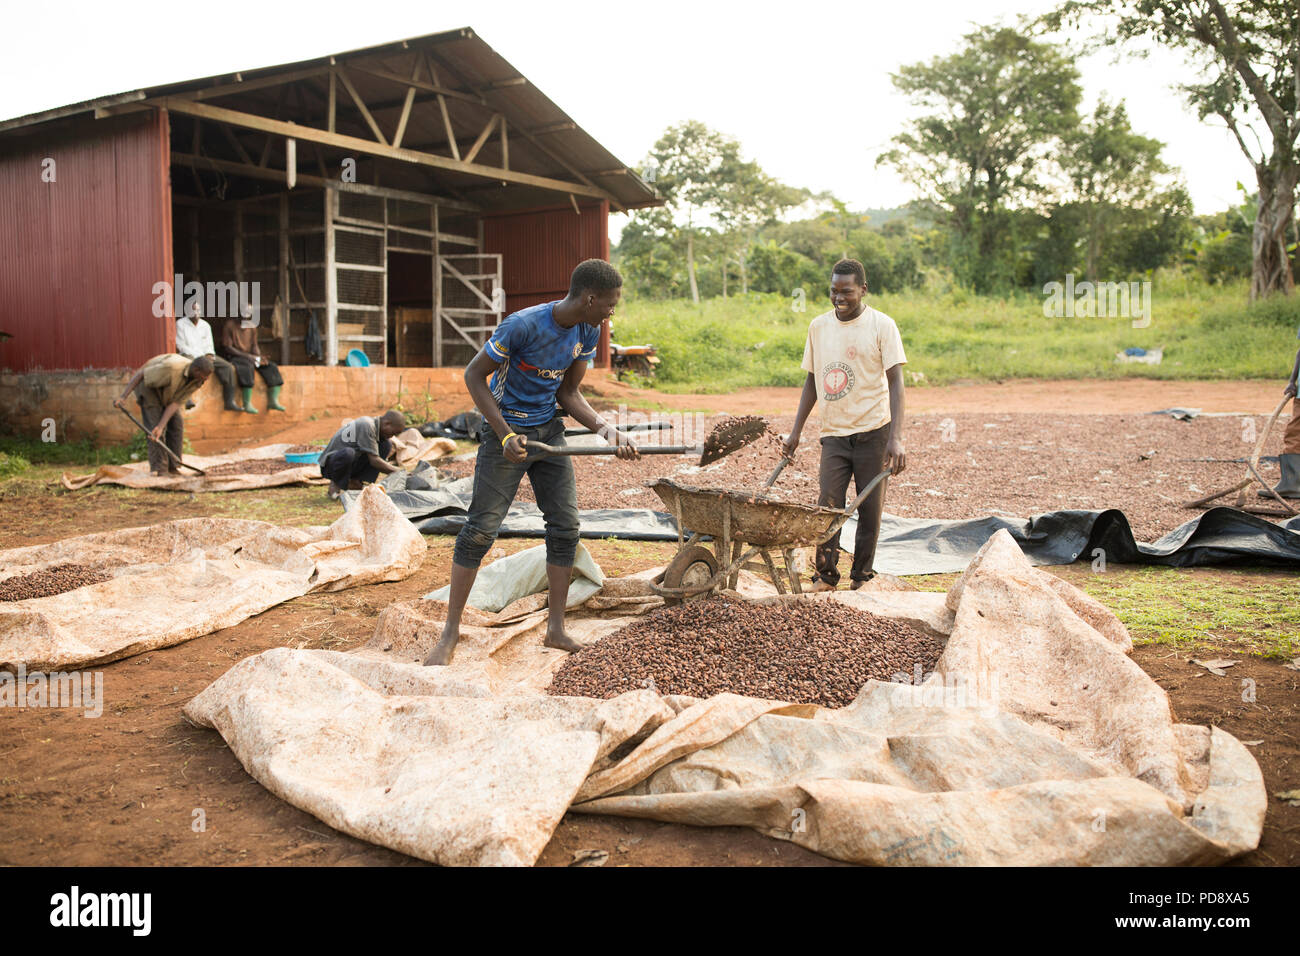 Workers process fermented cocoa beans together at a chocolate production facility in Mukono District, Uganda. Stock Photo